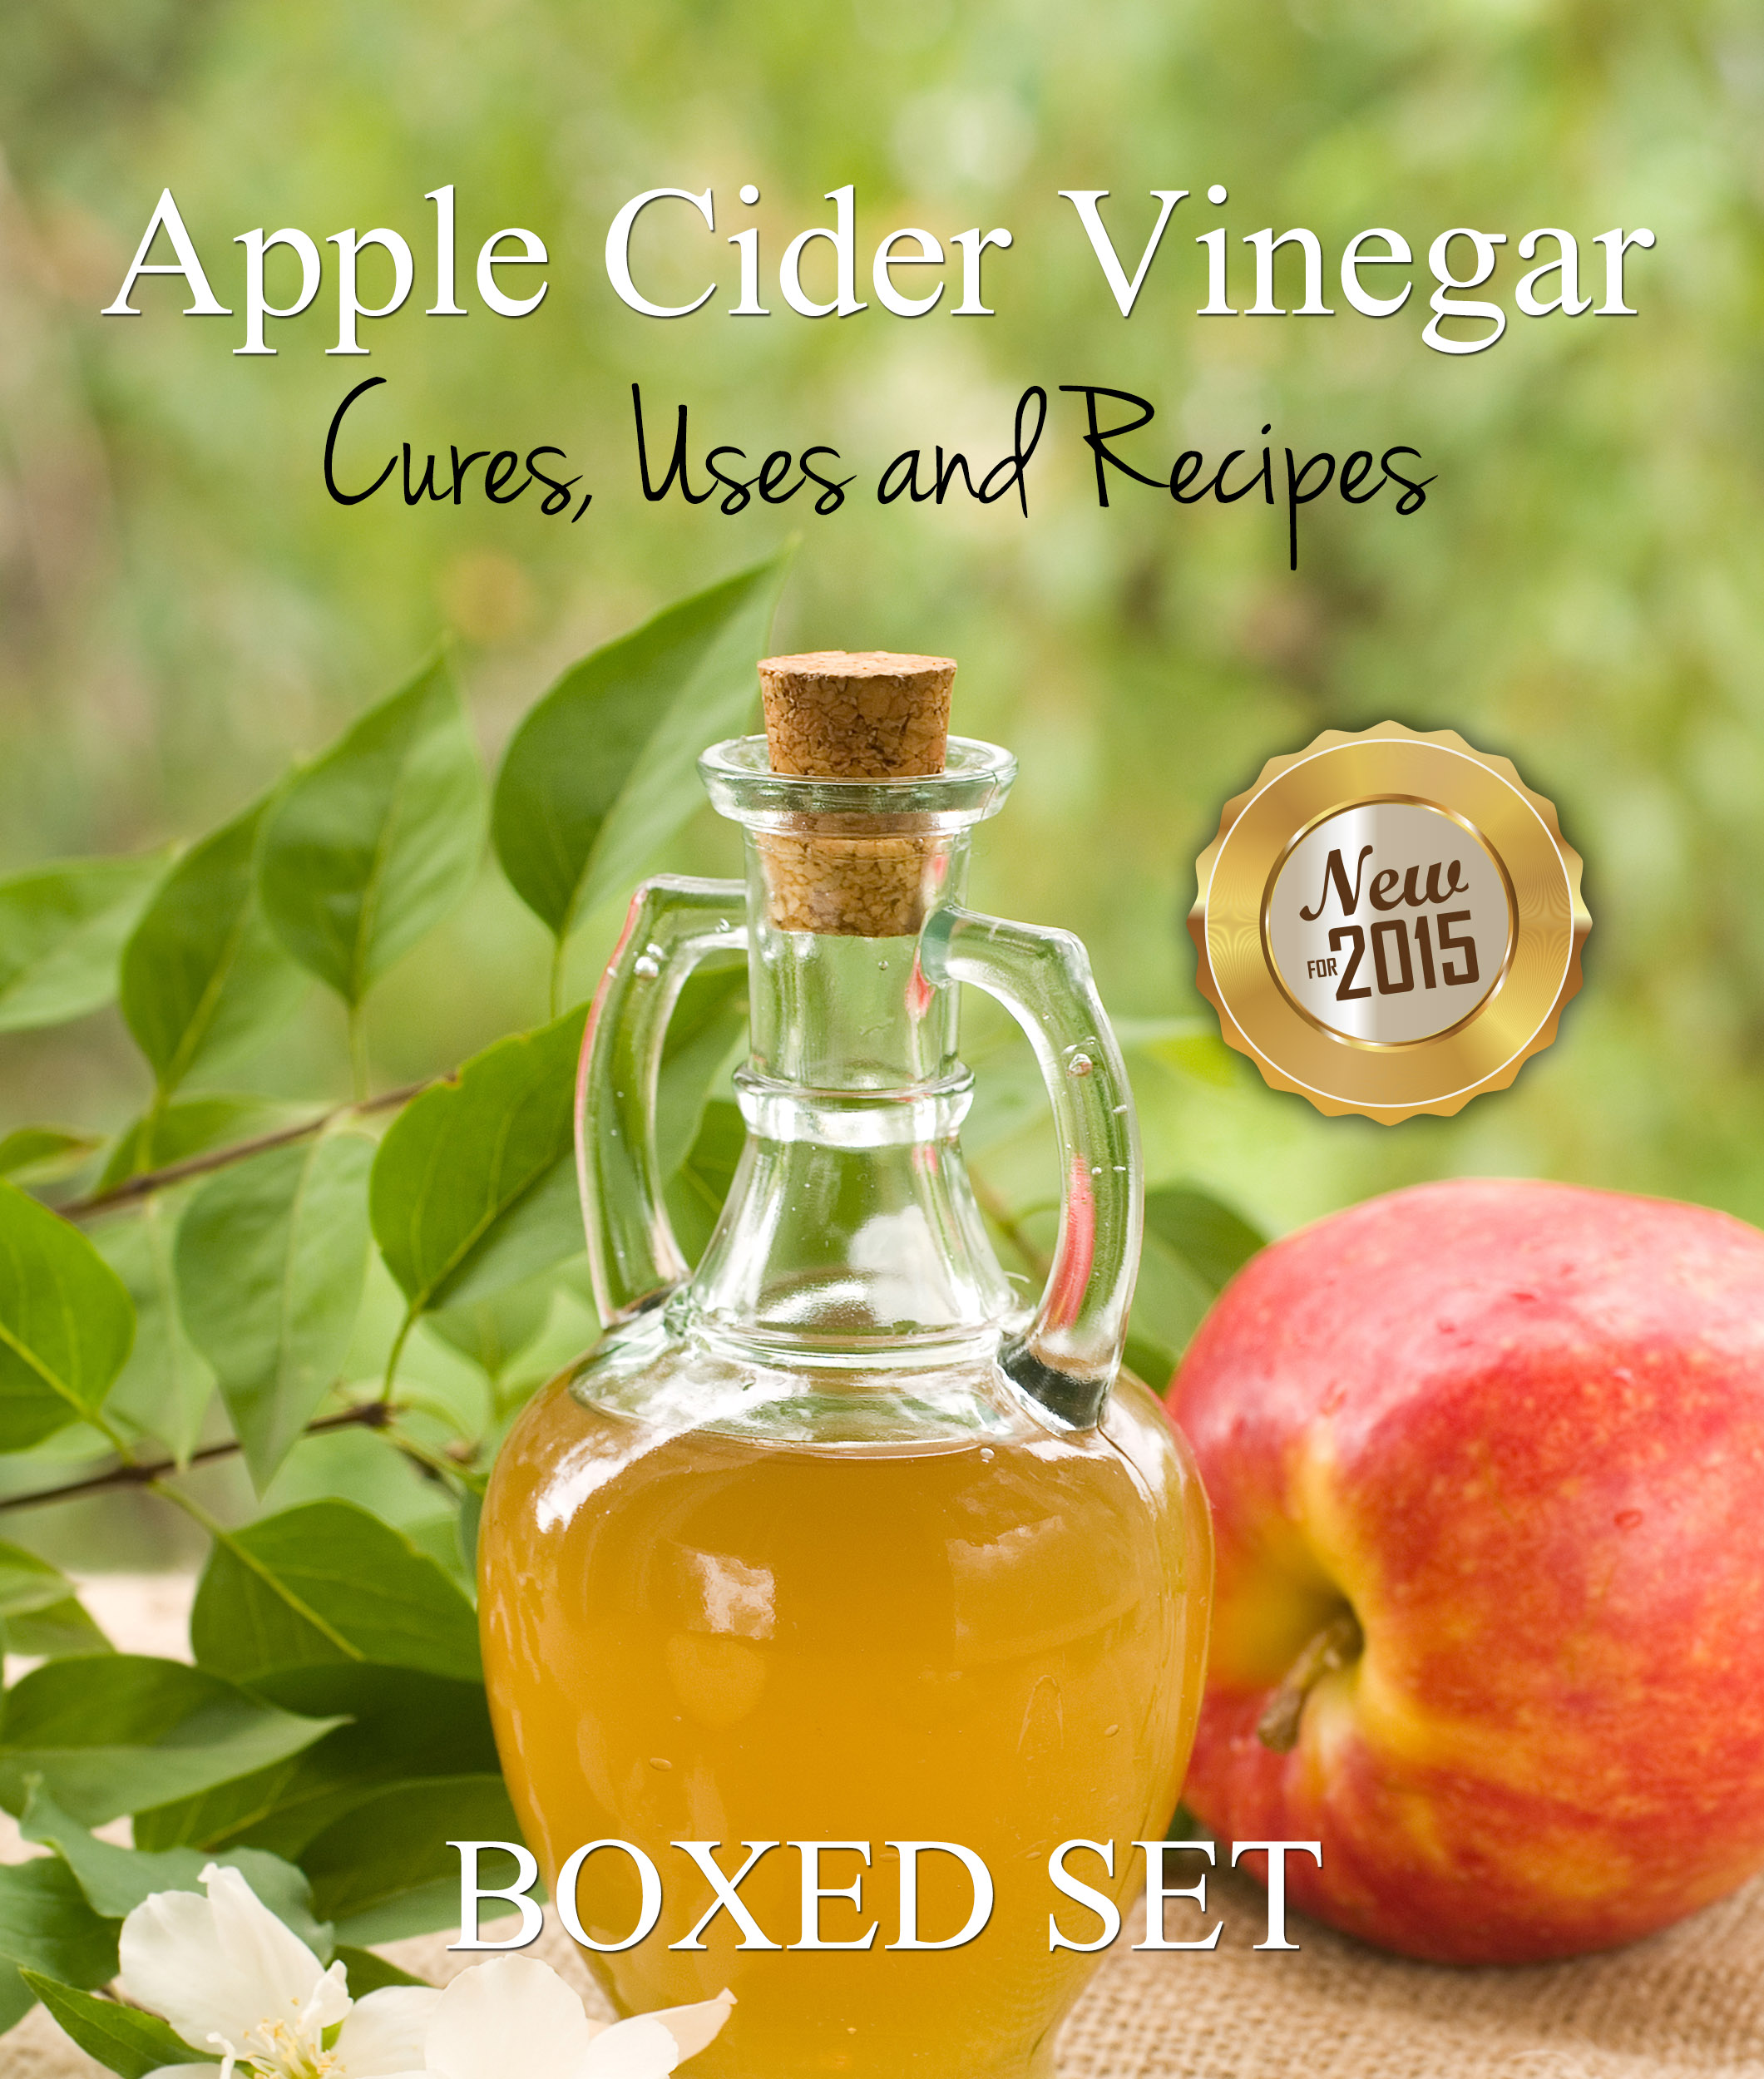 Table of Contents - Apple Cider Vinegar Boxed Set About The Author - photo 1